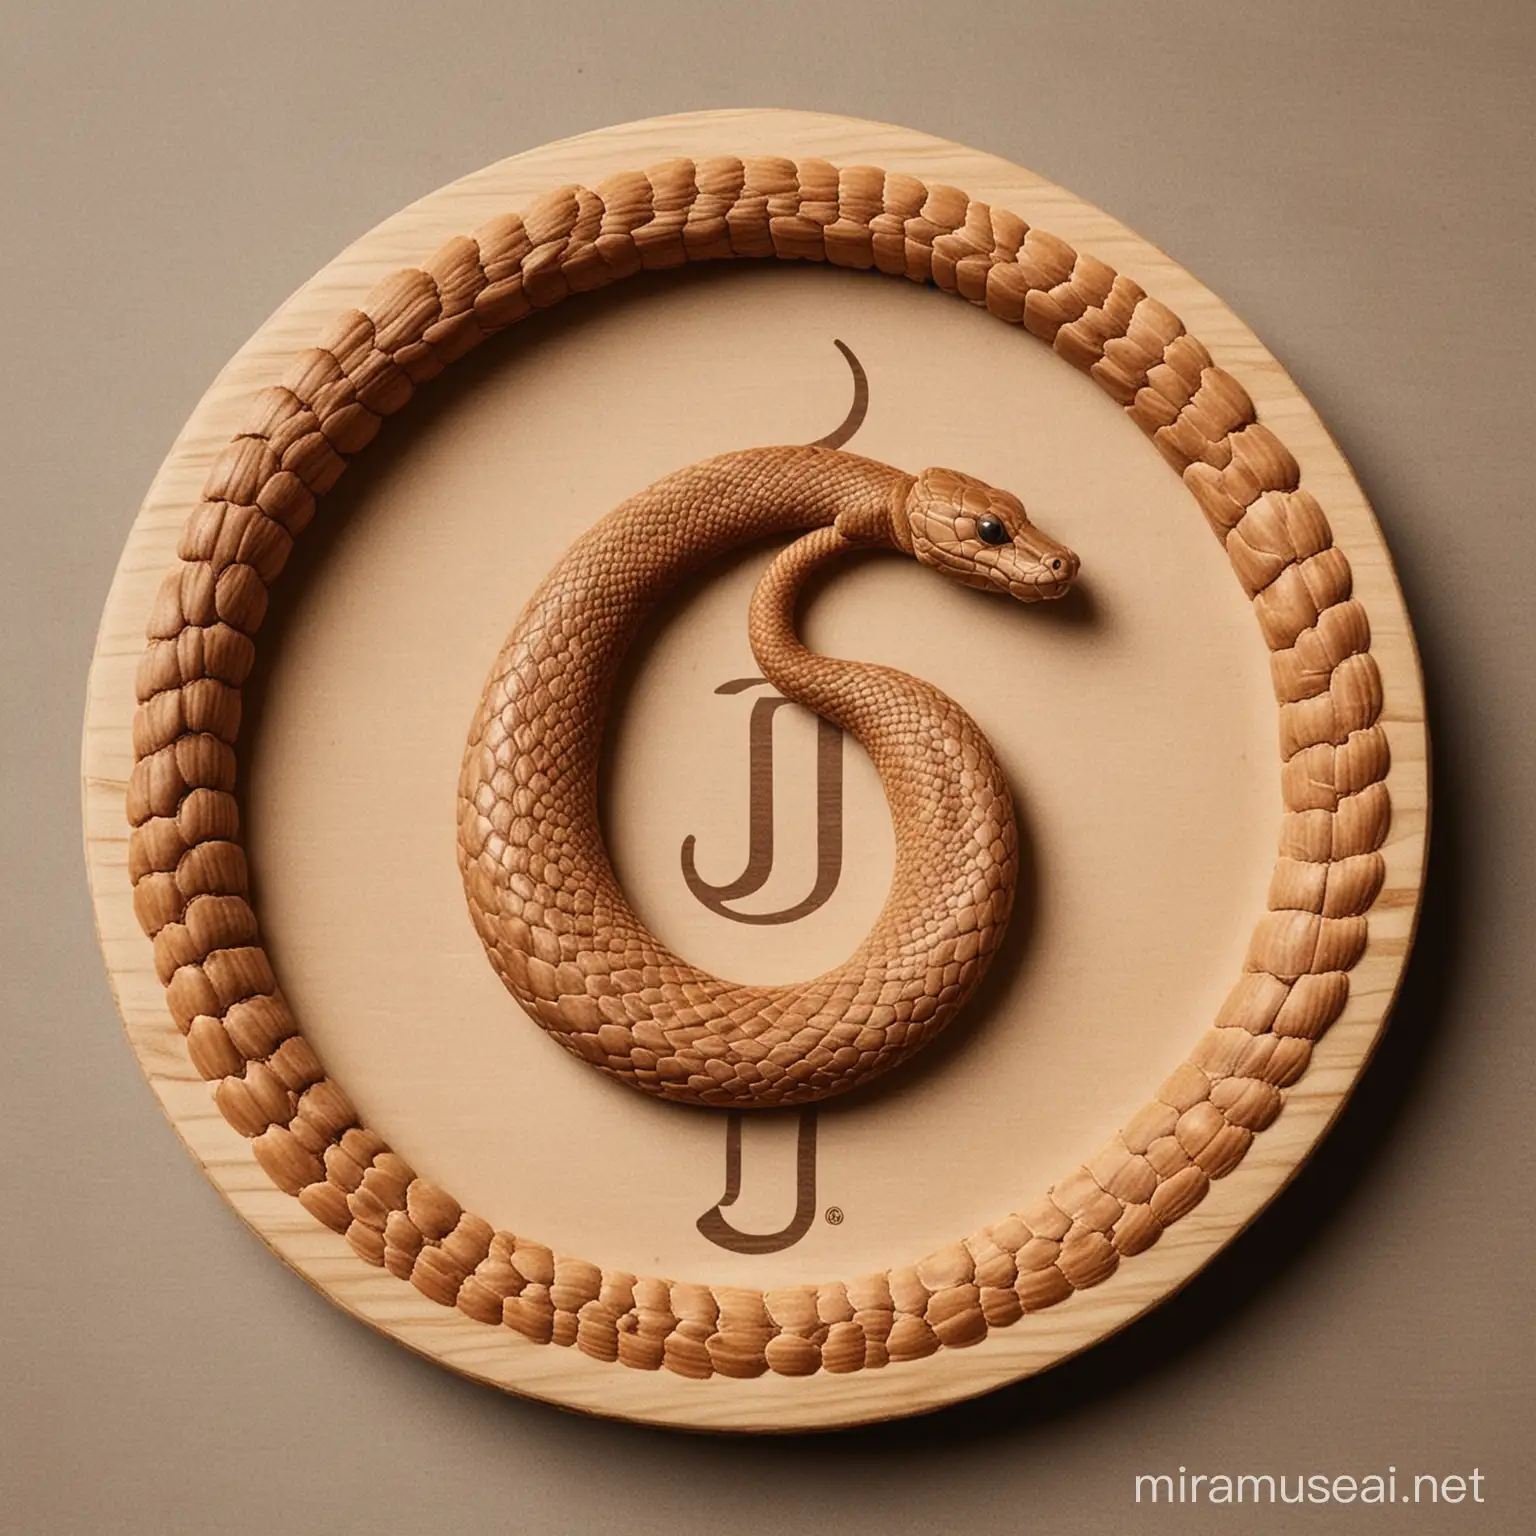 The logo is in a rim made of natural material, in this circle there is the letter “J”, the letter “J” itself is made in the form of a submissive cobra snake, and the rim itself is made of natural material.